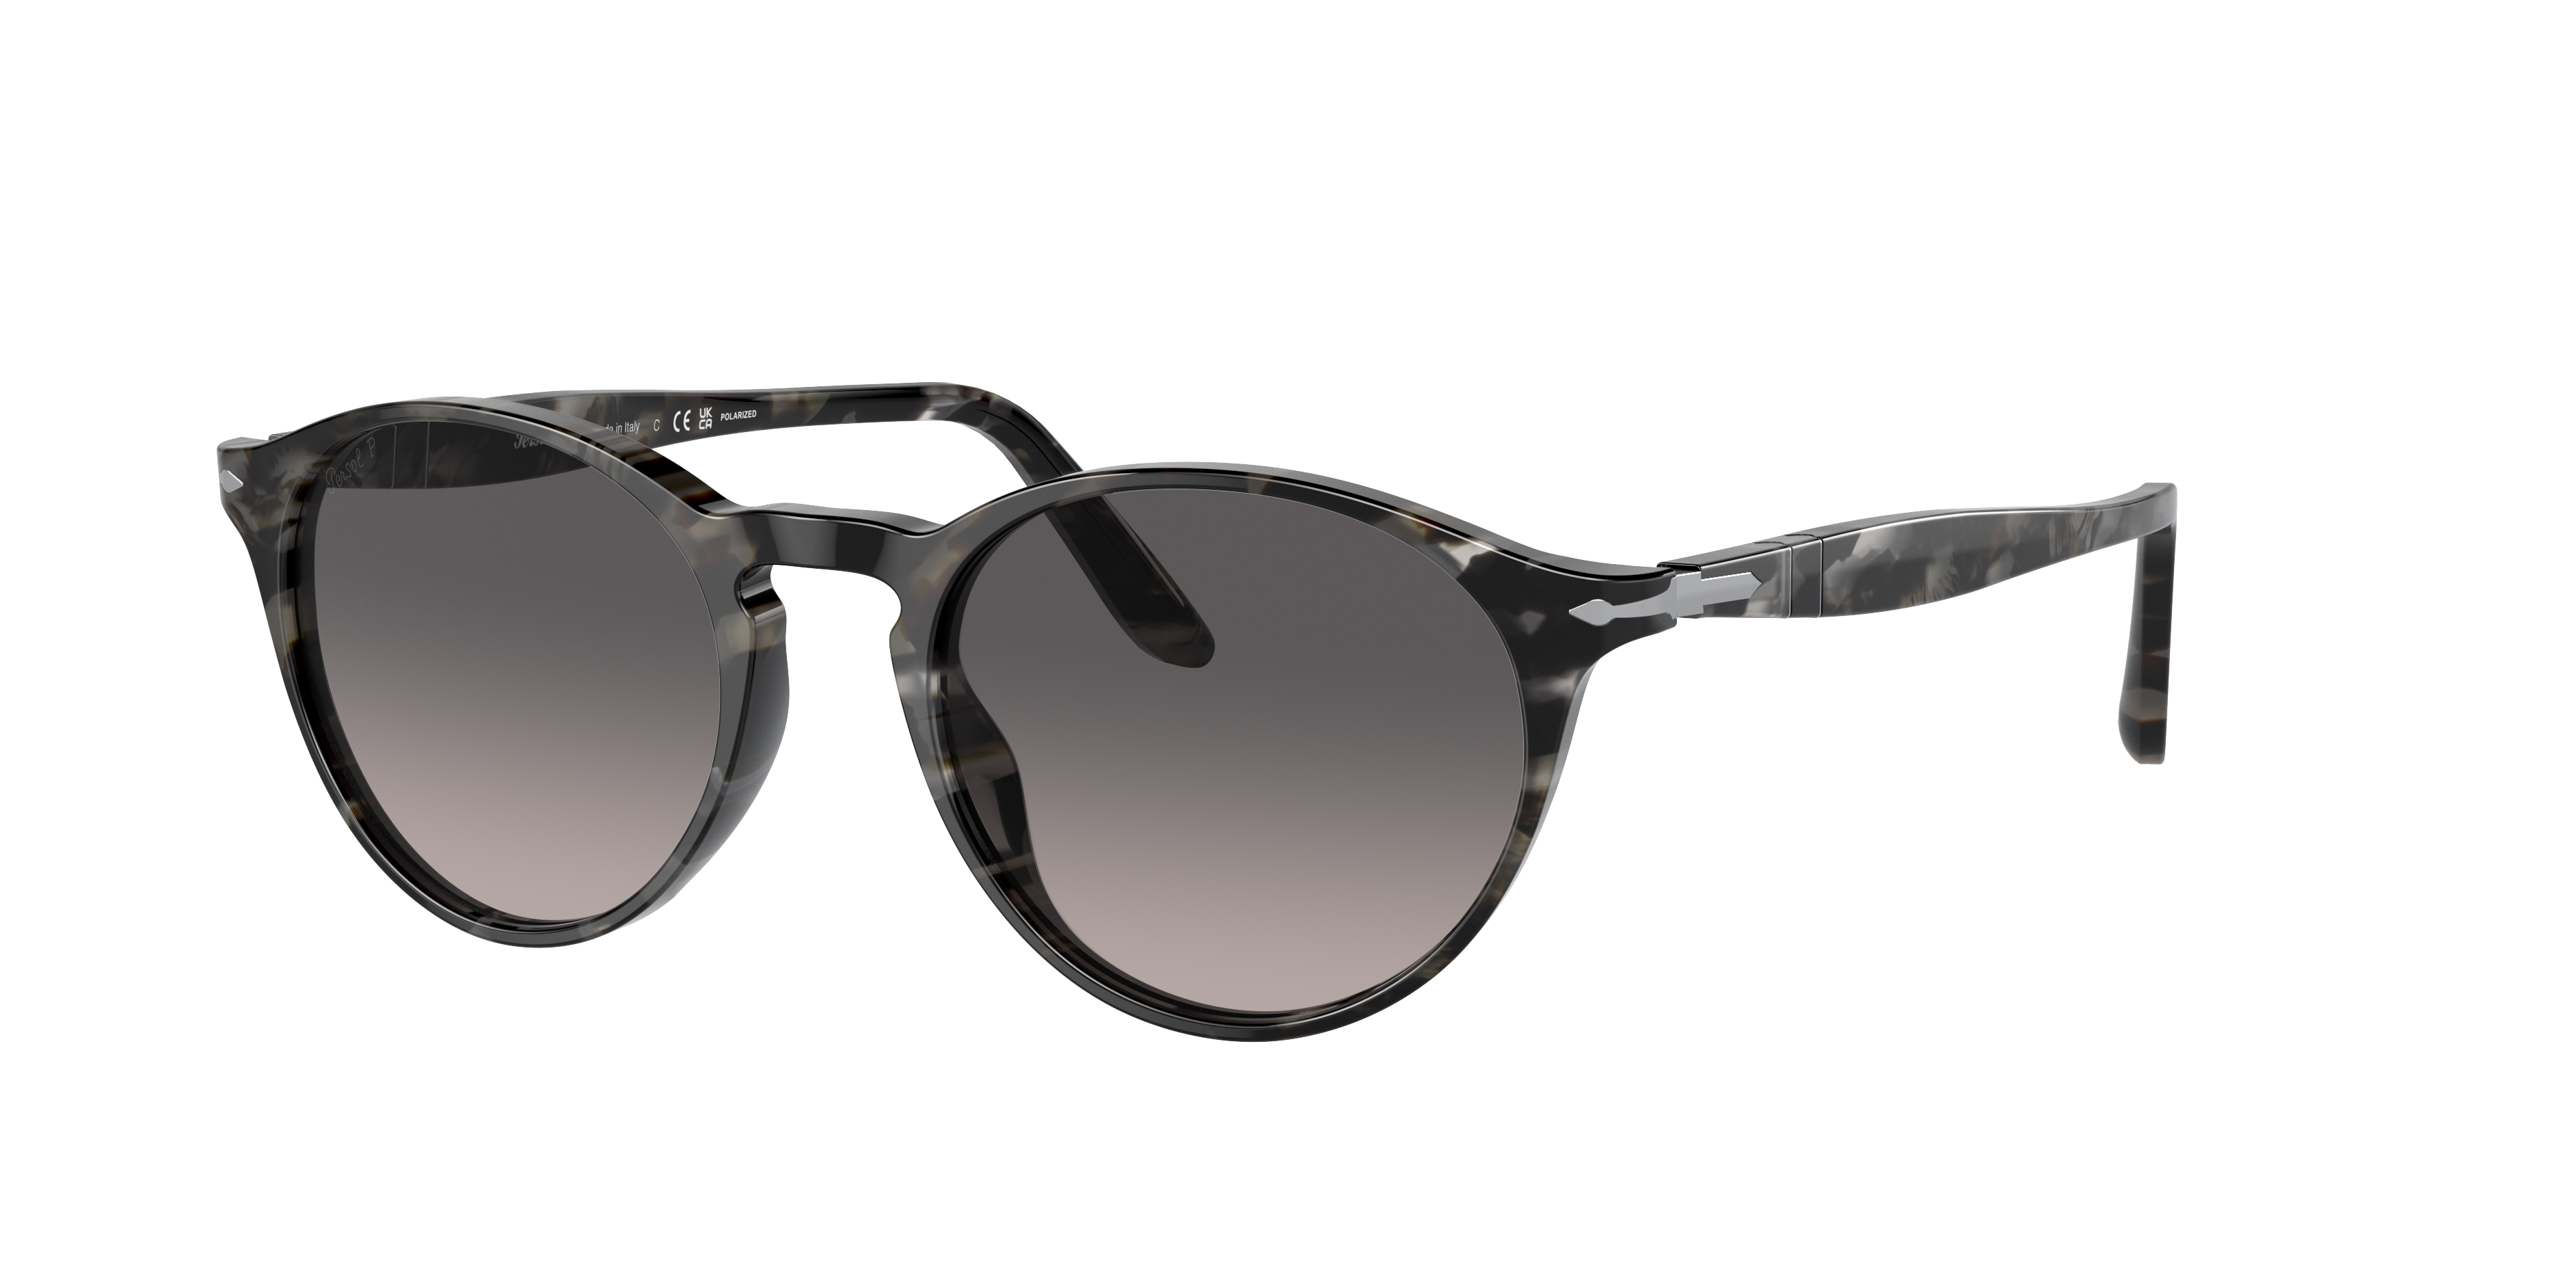 Persol This phantos sun frame in acetate is characterised by emblematic  retro elements and super-thin profiles. Featuring the iconic Mini supreme  